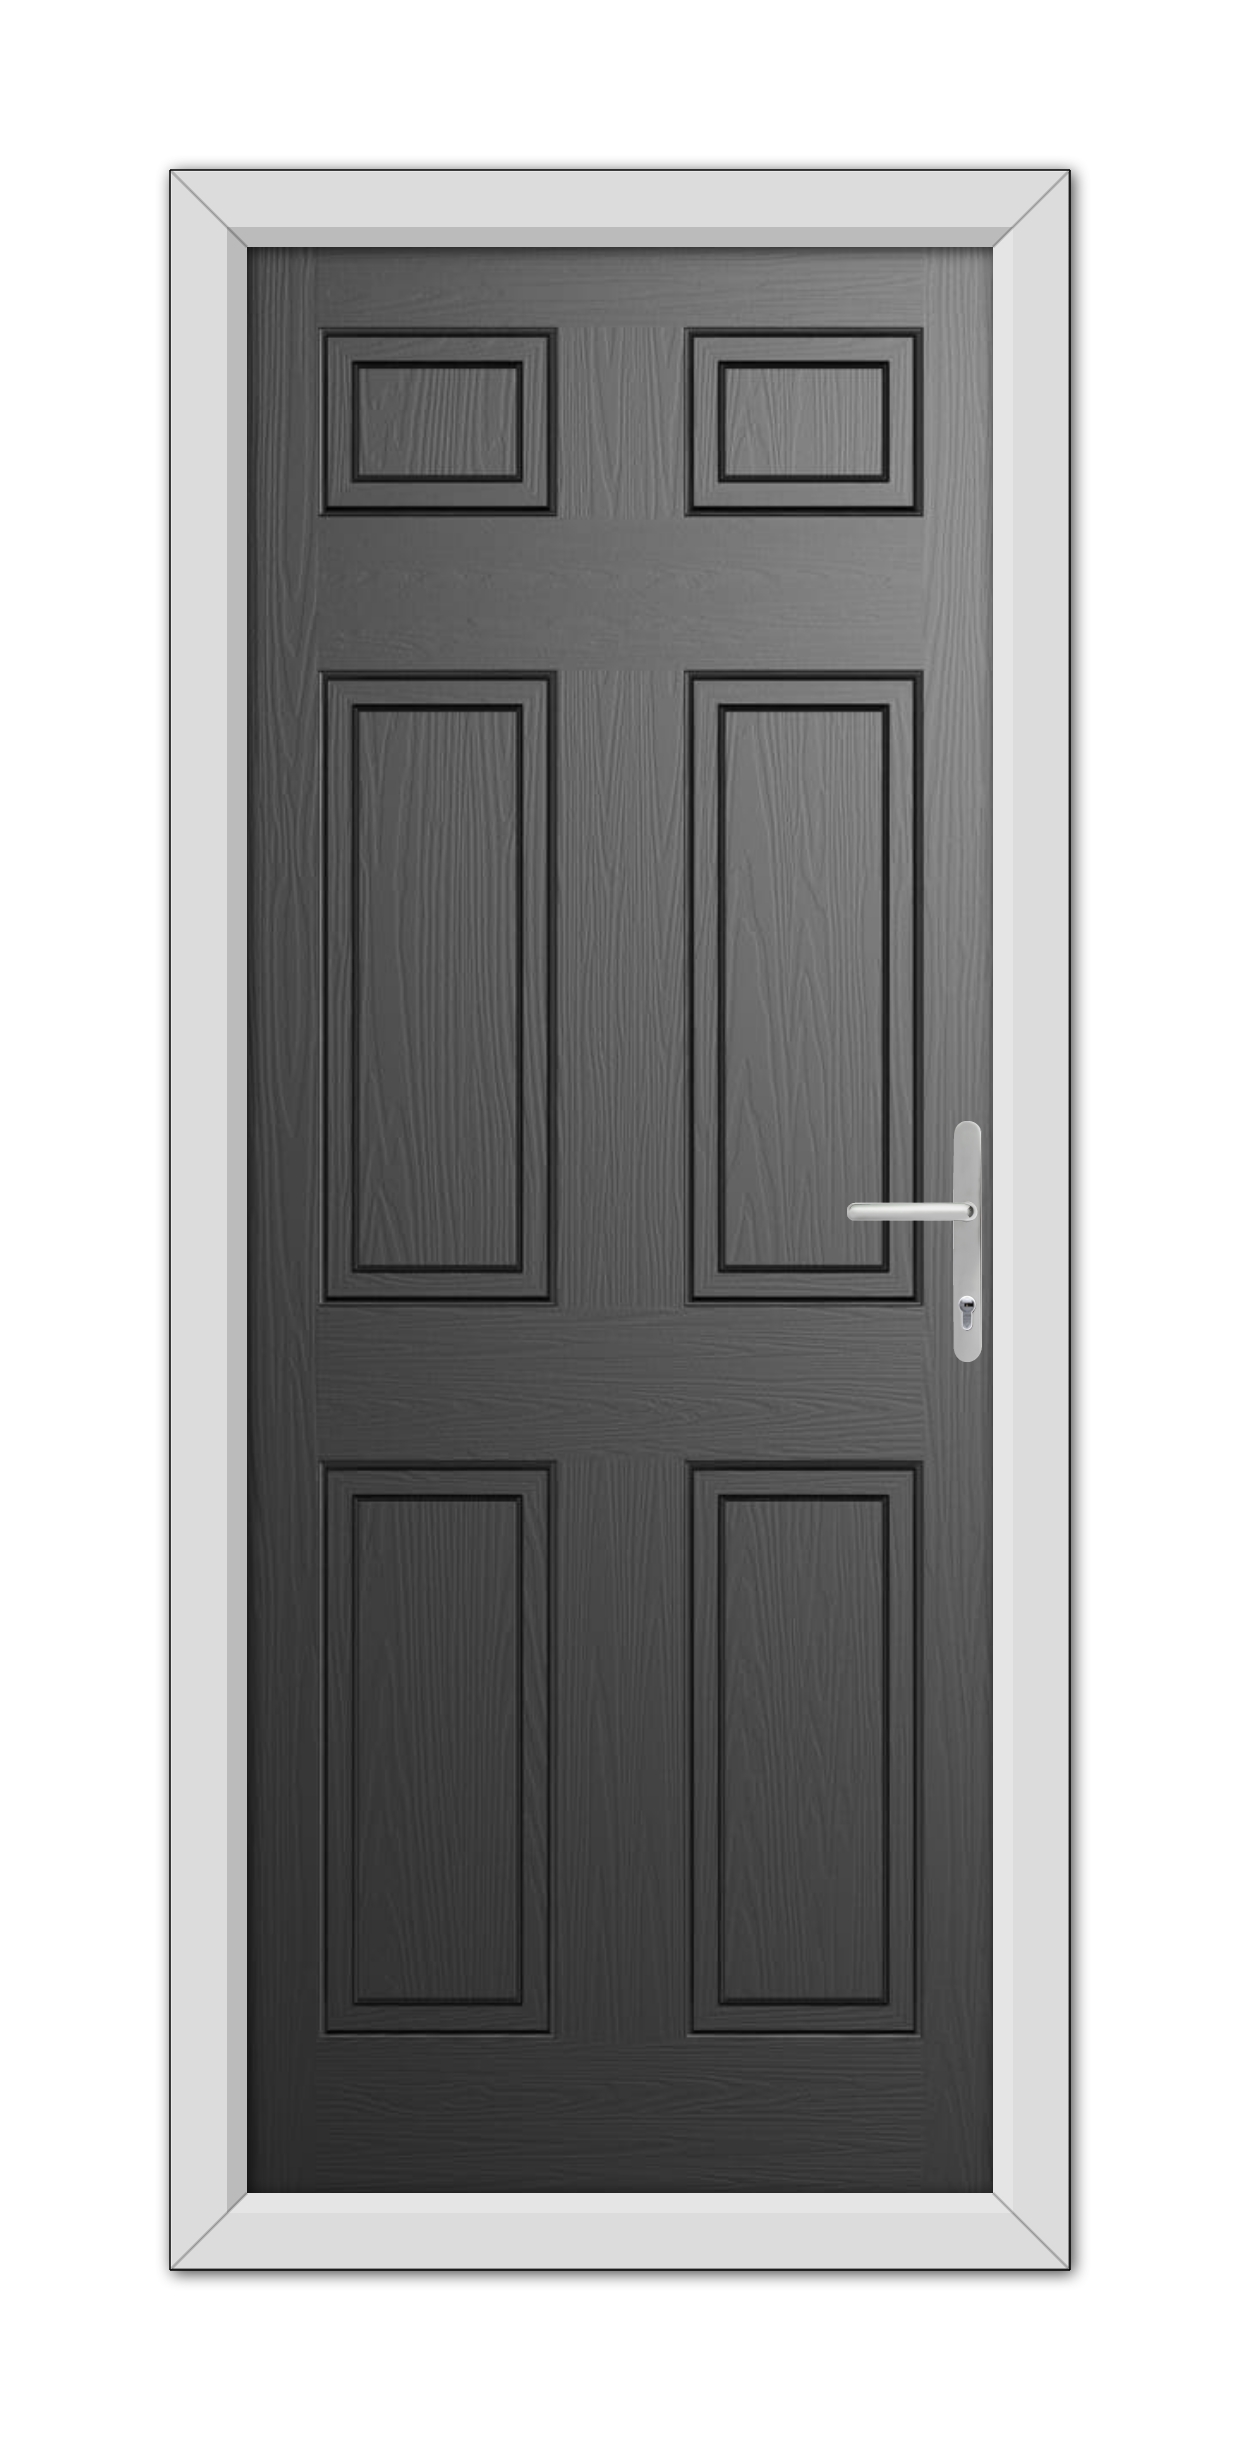 A modern Black Middleton Solid Composite Door with six panels and a silver handle, set within a white frame.